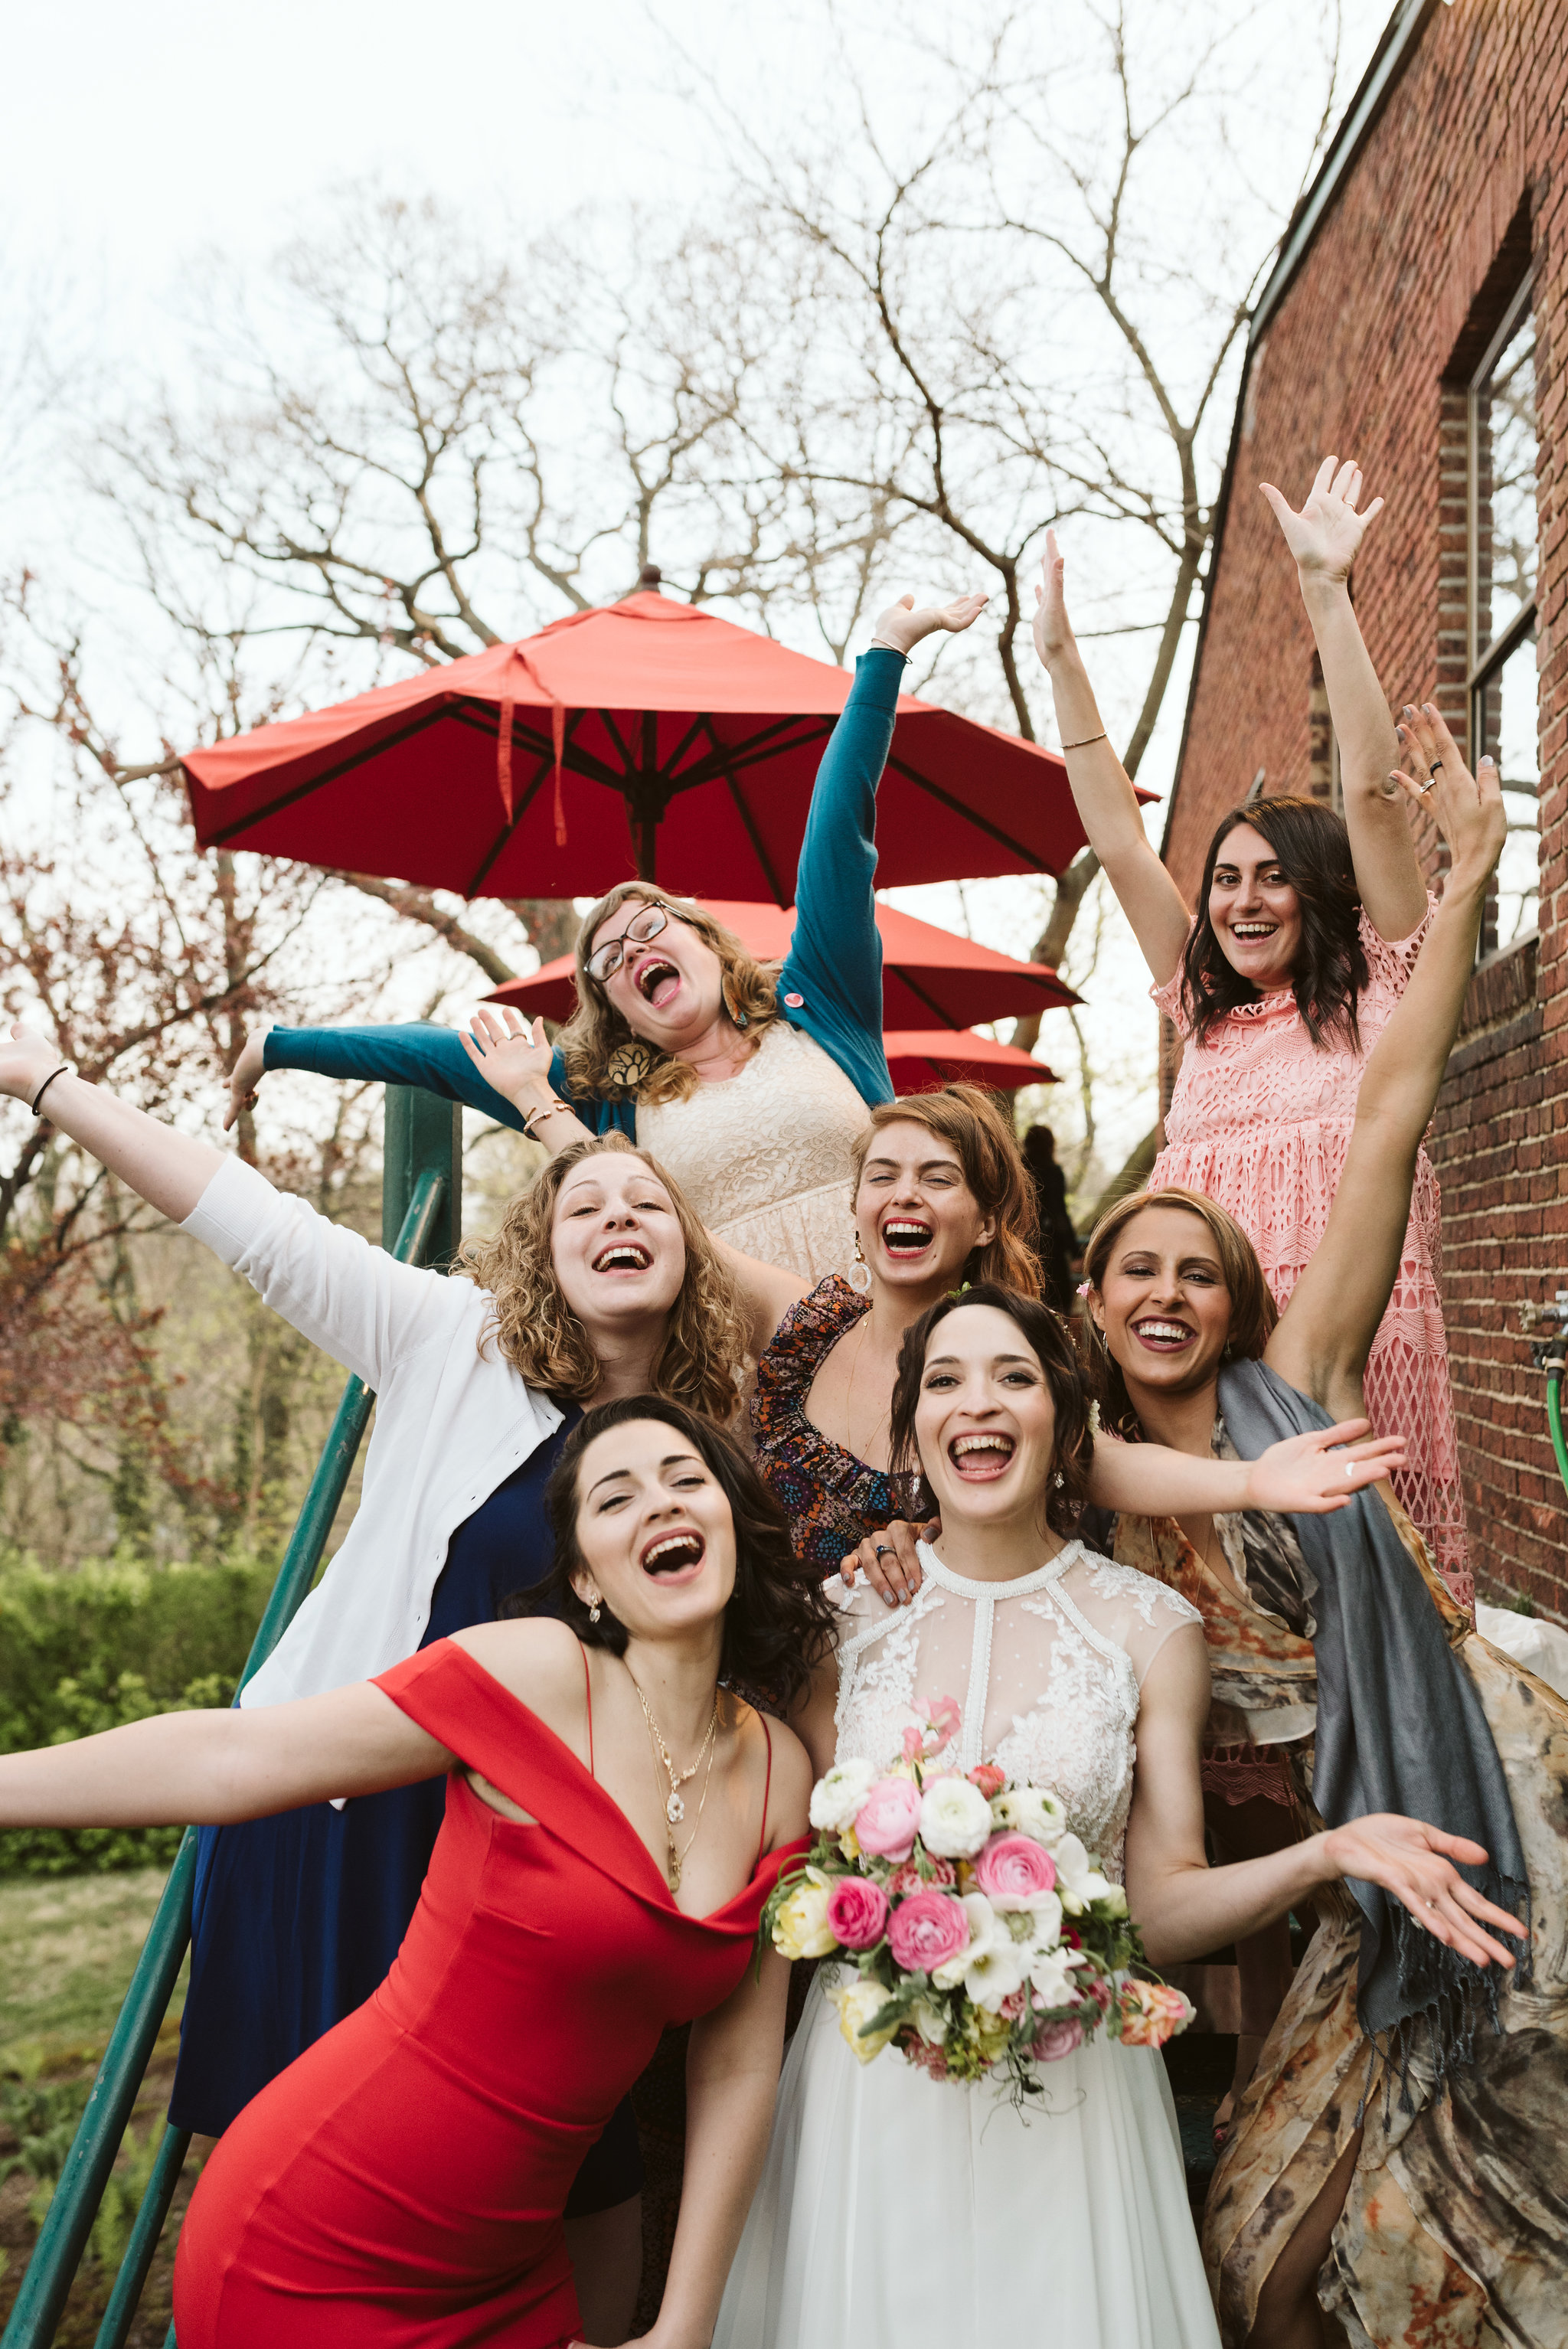  Baltimore, Maryland Wedding Photographer, Hampden, Eco-Friendly, Green, The Elm, Simple and Classic, Vintage, Fun Portrait of Bride with Friends on Staircase 